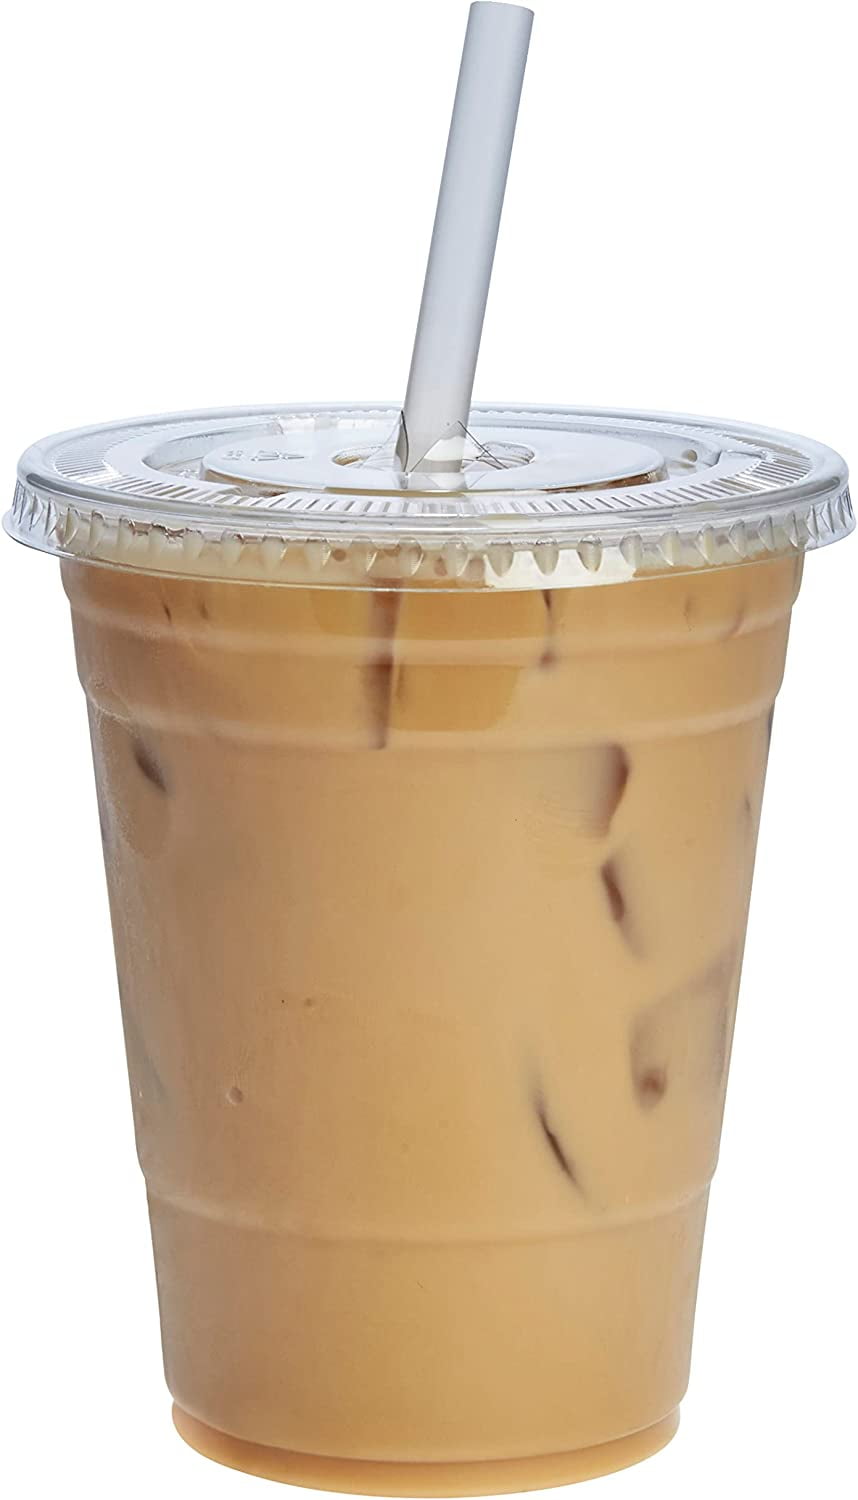 [600 Pack] 20 oz Clear Plastic Cups with Flat Lids, Disposable Iced Coffee  Cups, BPA Free Premium Cr…See more [600 Pack] 20 oz Clear Plastic Cups with